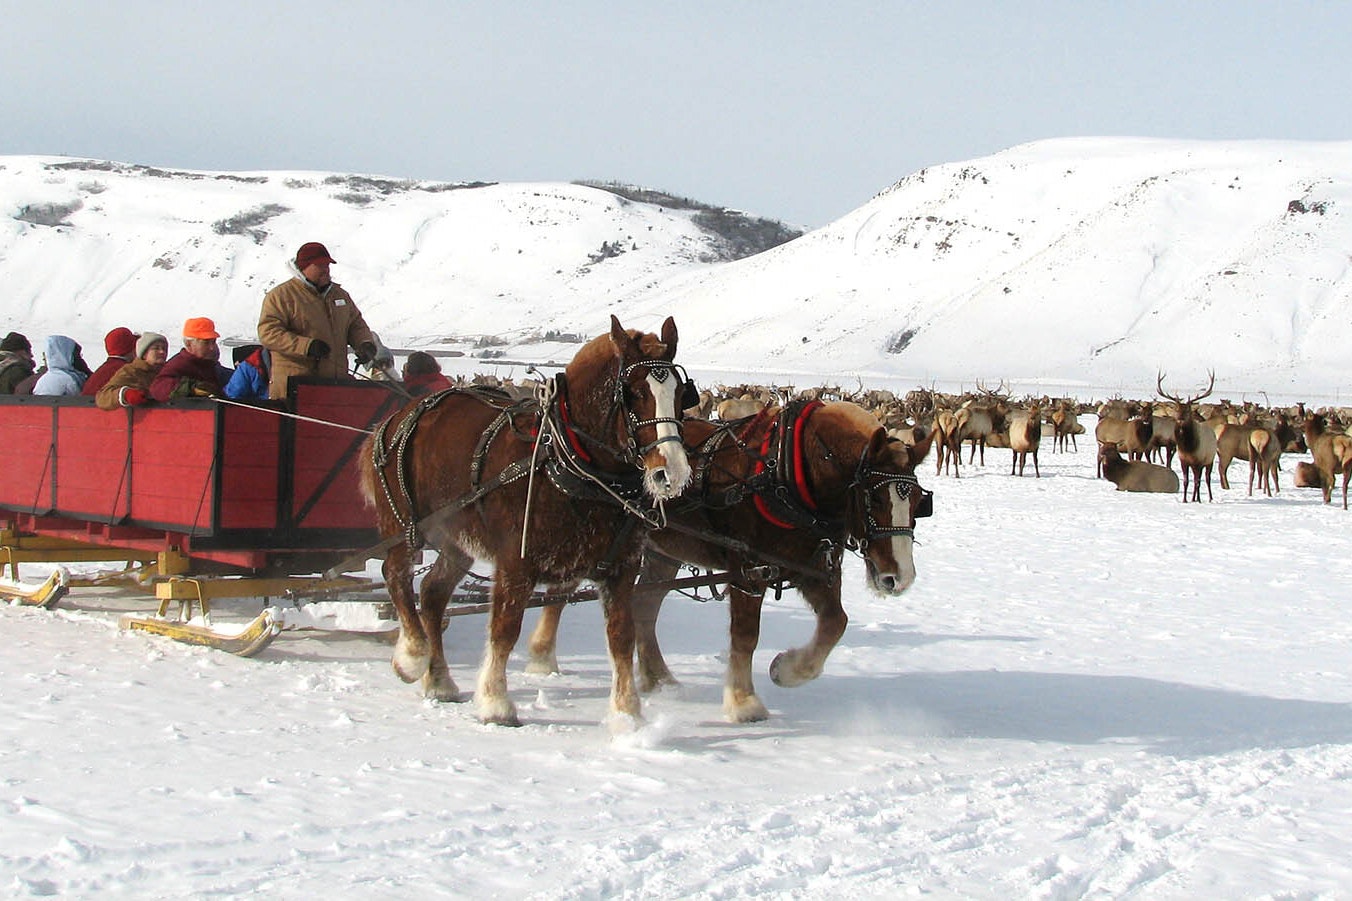 The annual sleigh rides through the National Elk Refuge near Jackson, Wyoming, gets people almost close enough to touch the thousands of wild elk that come down to feed there.